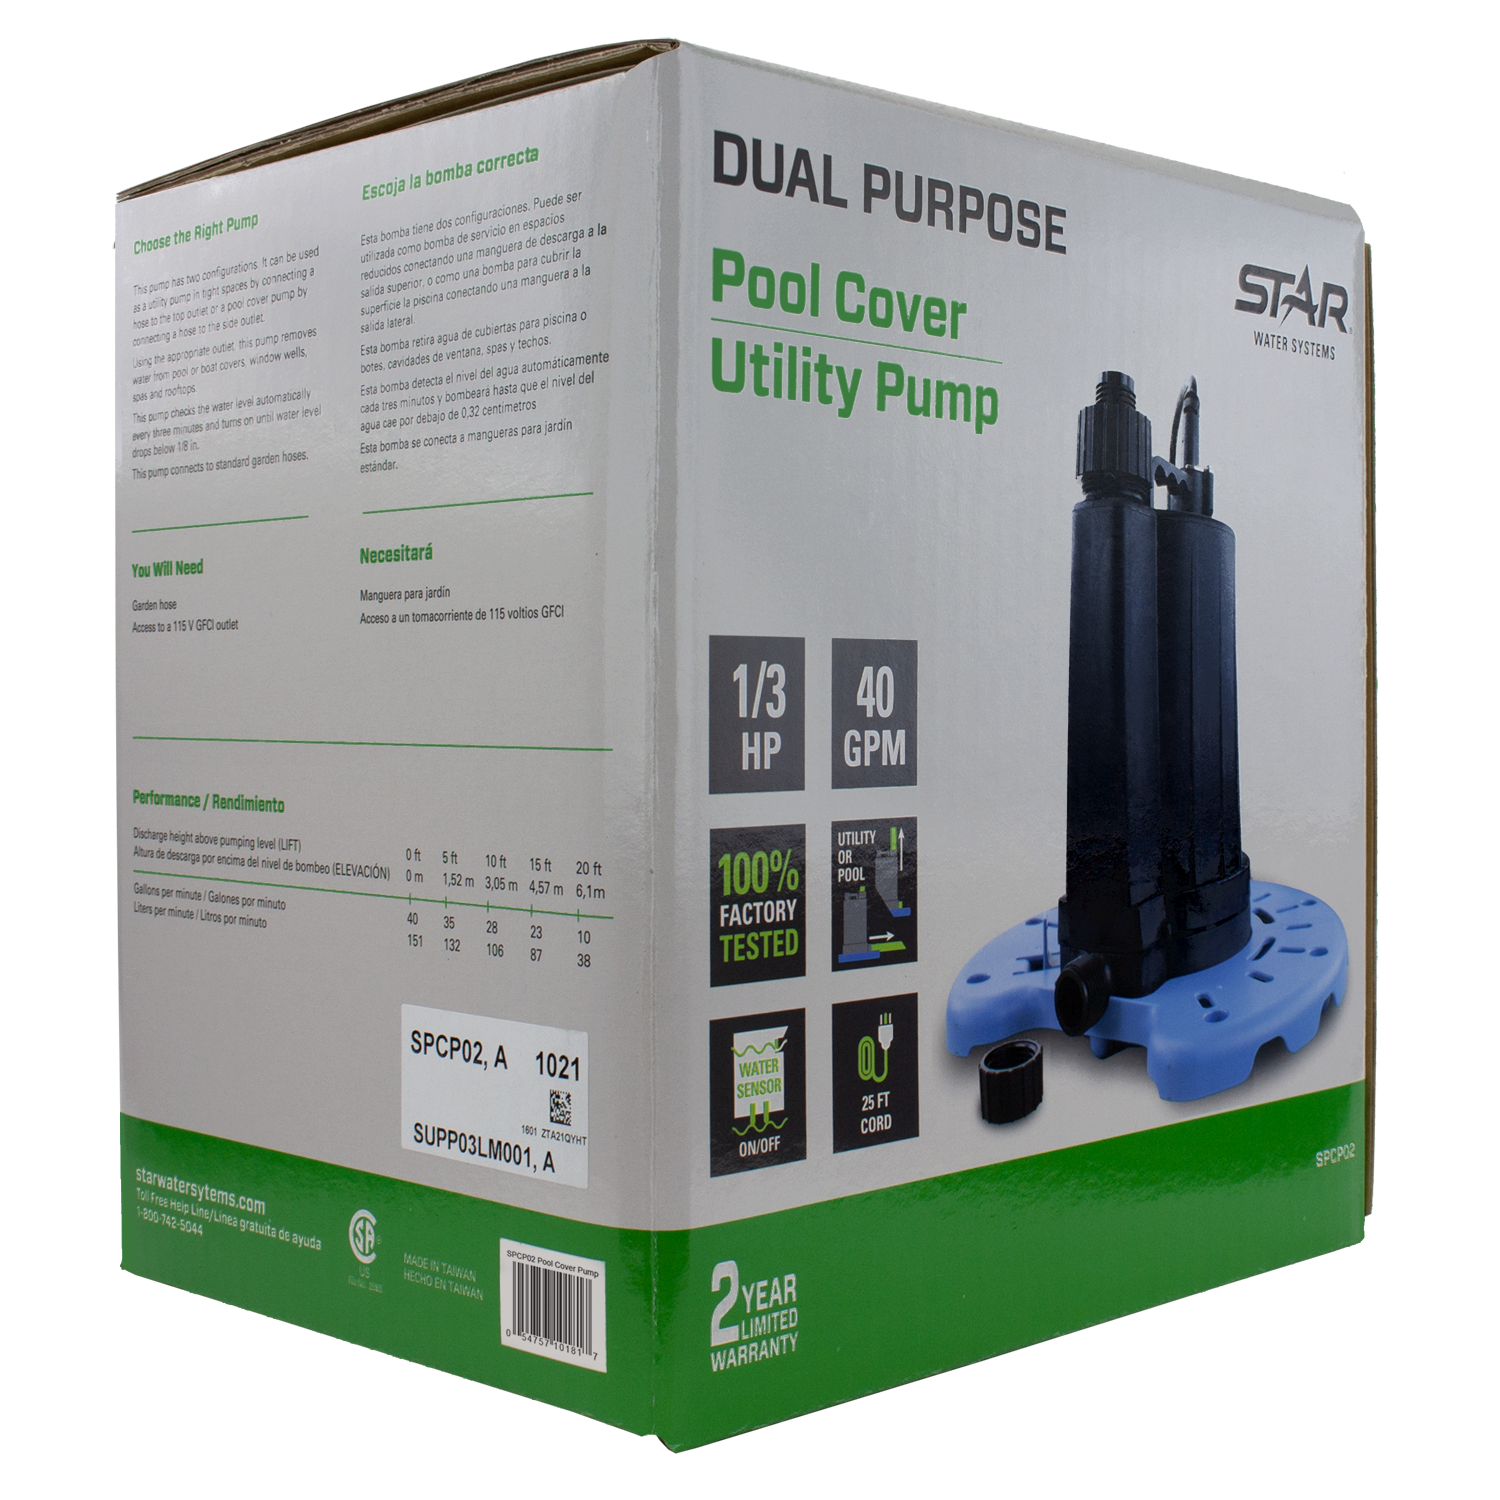 40 FT Power Cord Pump by Automatic Pool Covers, Inc. + CoverBlast